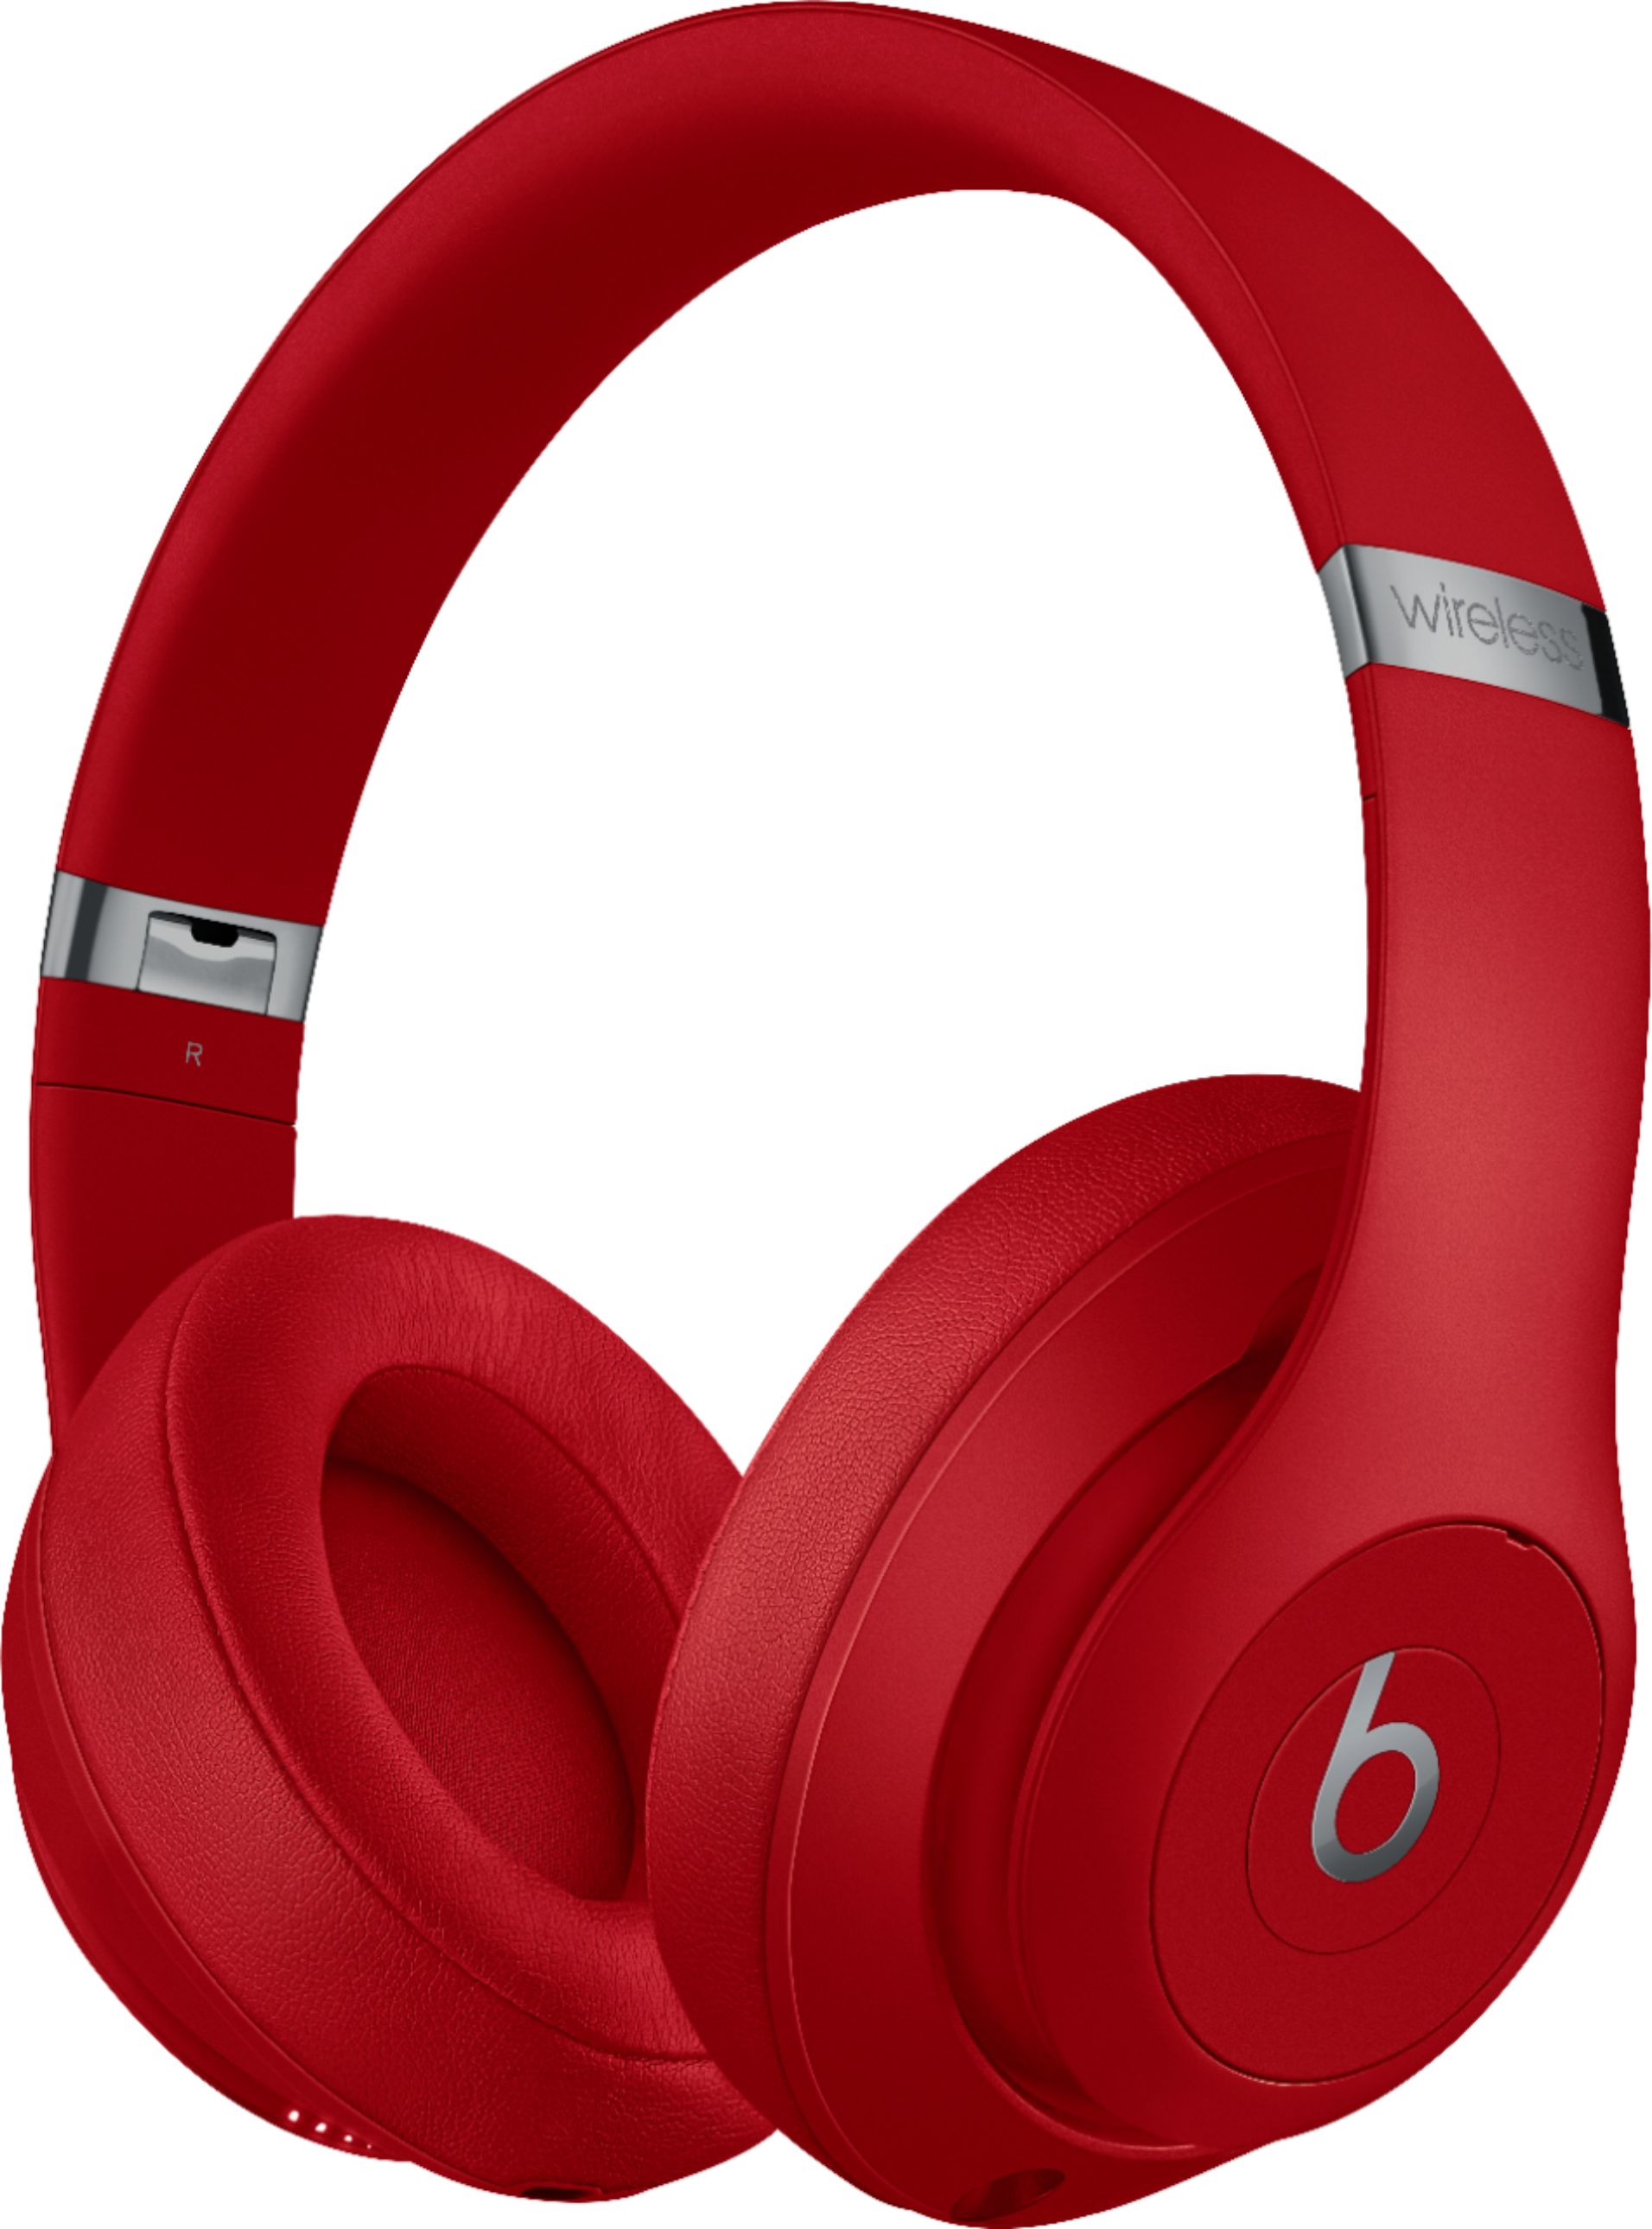 Monster Beats by Dr. Dre Studio High-Definition Headphones - Headphones -  full size - wired - 3.5 mm jack - red 